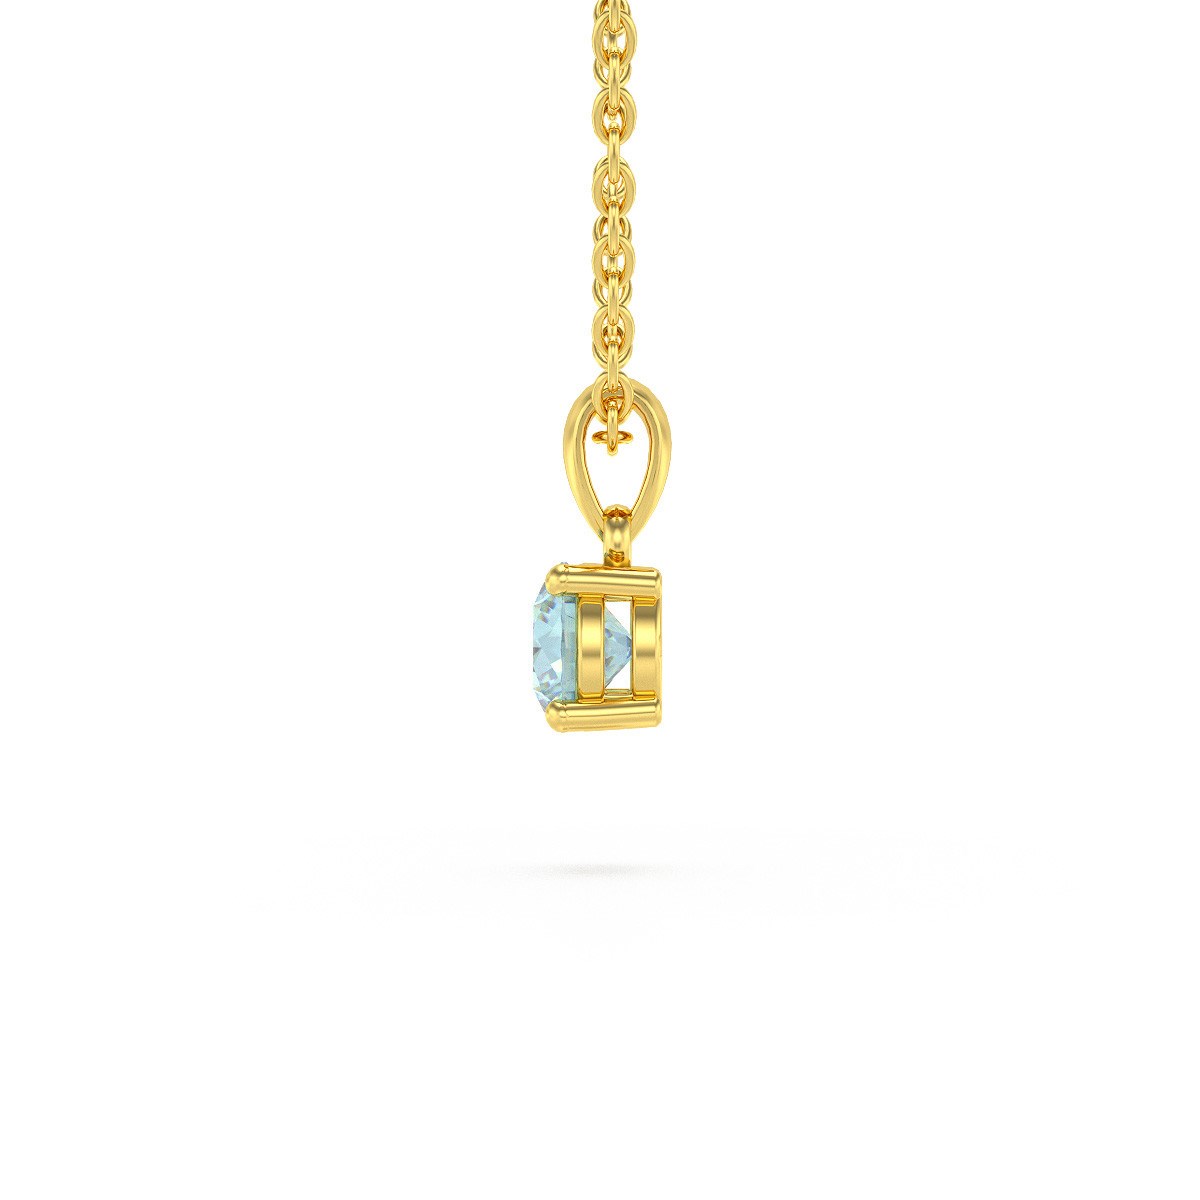 Collier Pendentif ADEN Or 585 Jaune Aigue-Marine Chaine Or 585 incluse 0.23grs - vue 4